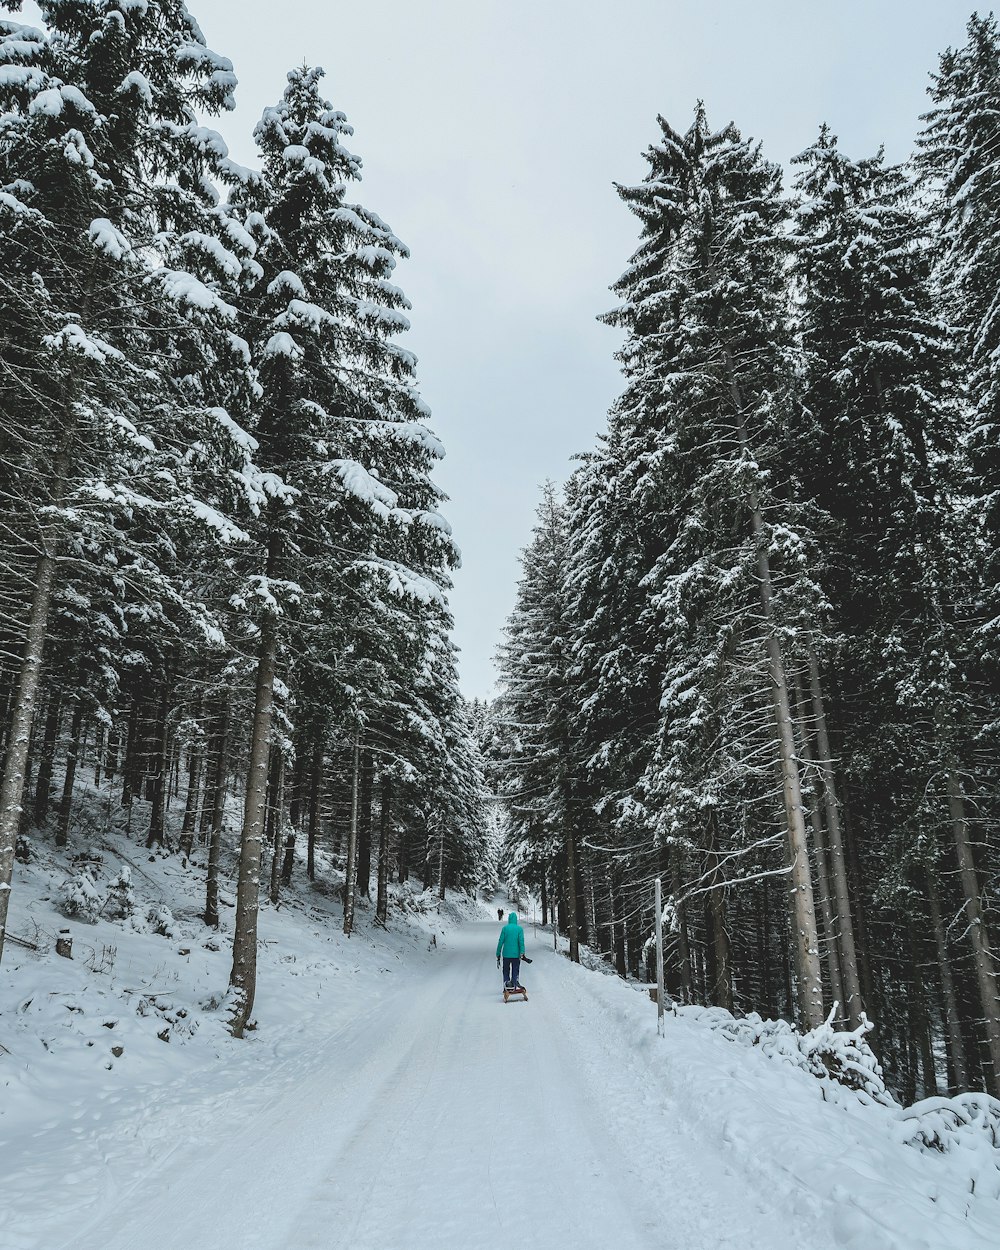 Snowy Forest Pictures Download Free Images On Unsplash